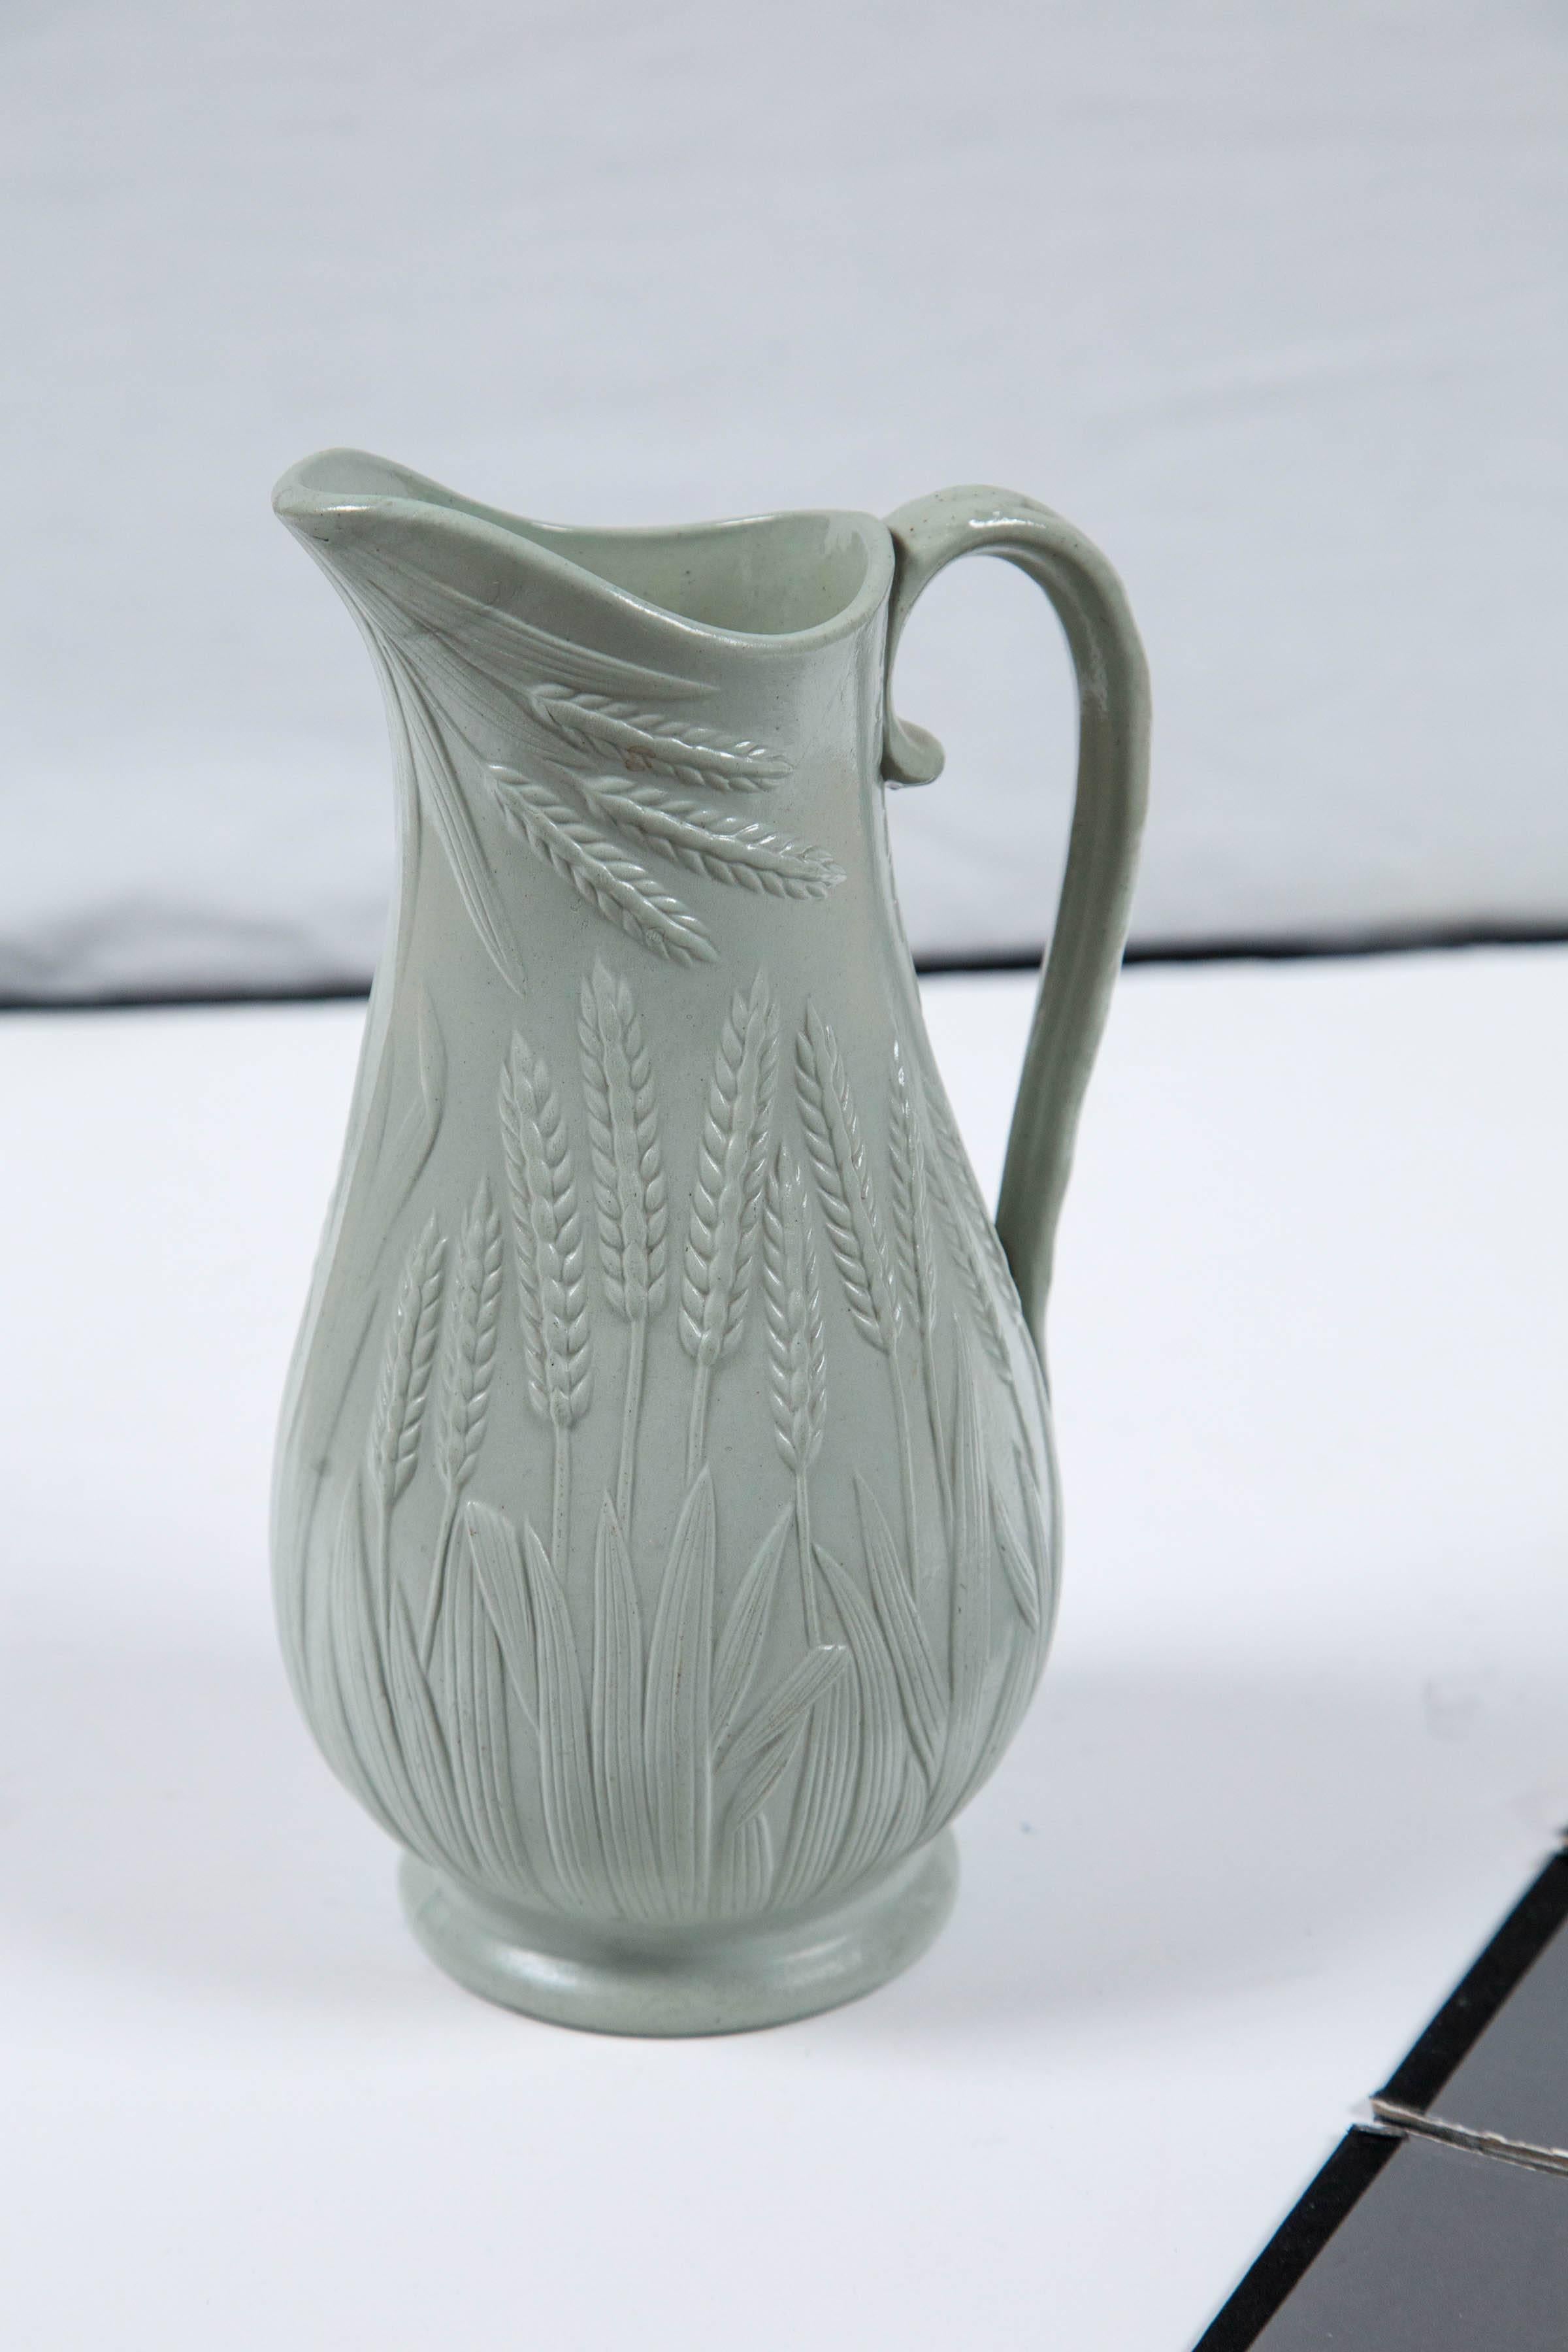 Antique salt glaze stoneware pitcher, circa 1860, Staffordshire, England. Raised relief 'wheat' pattern. Beautiful pale blue and gray glaze, often referred to as 'drab ware.'.